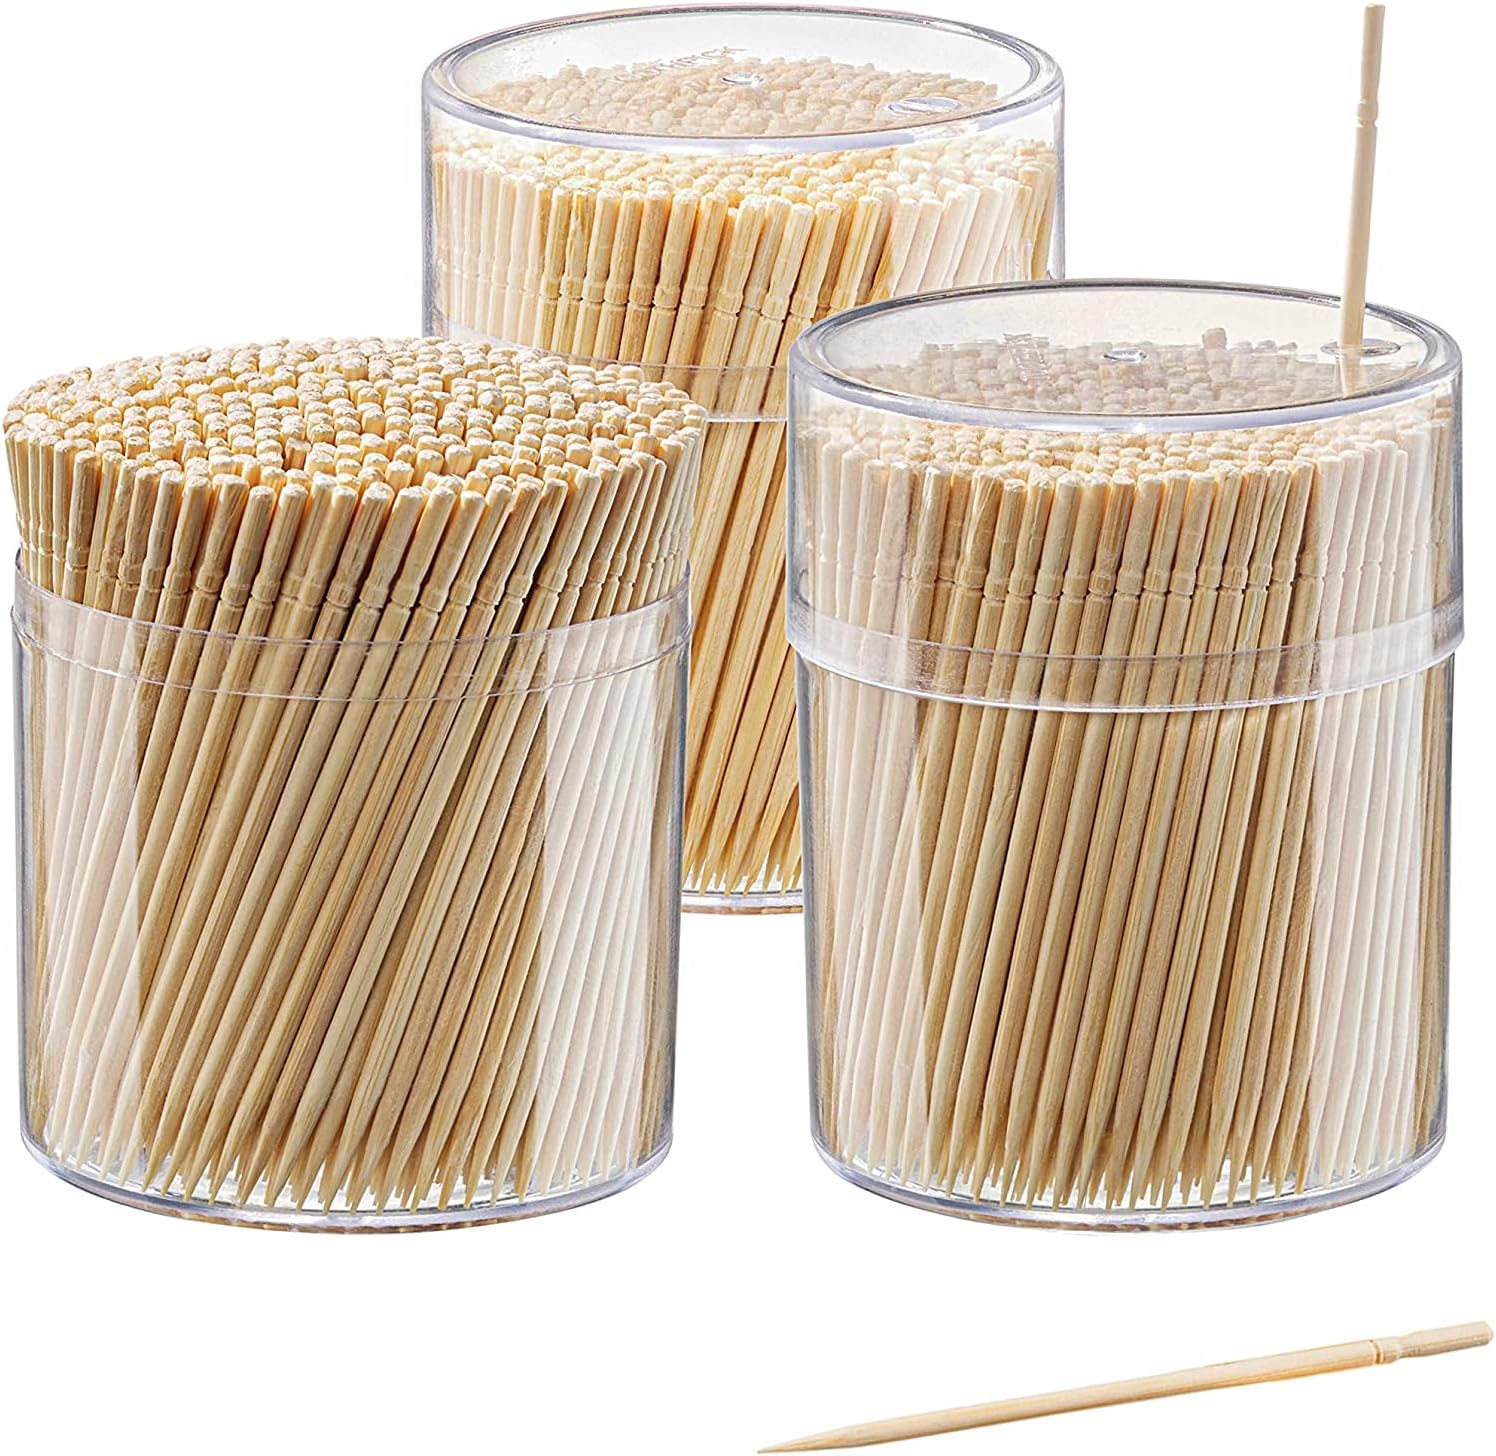 Comfy Package [1500 Count] Bamboo Wooden Toothpicks